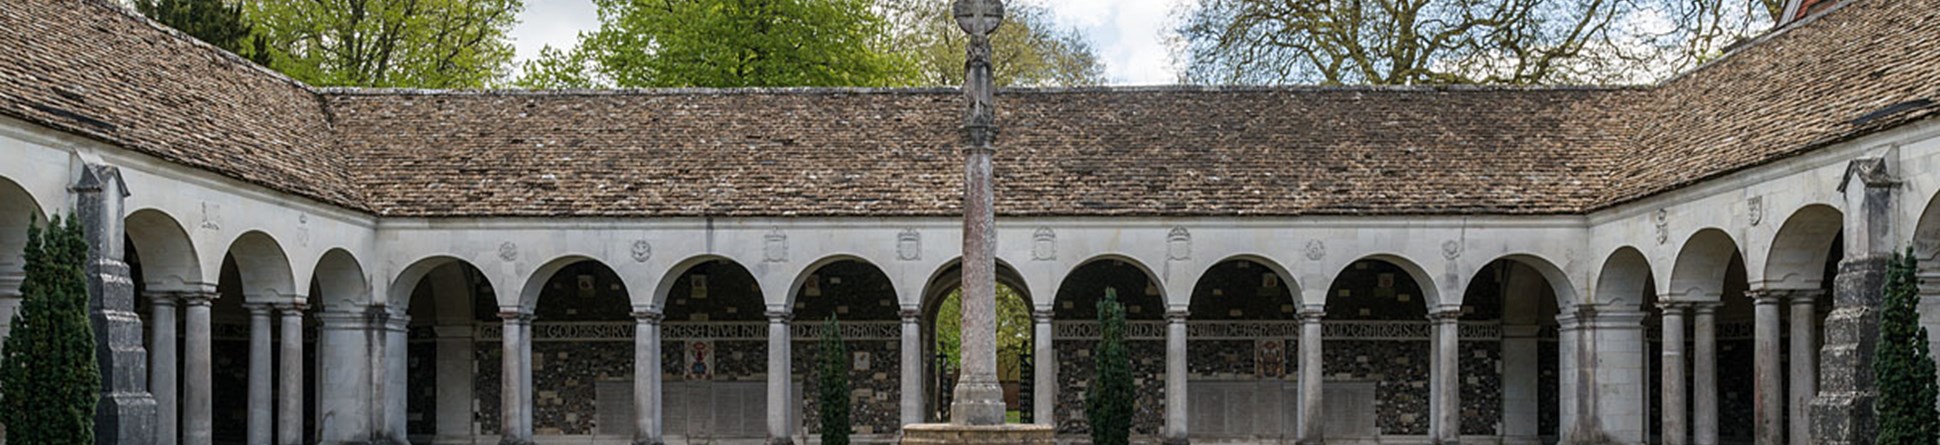 War memorial surrounded by cloistered building at Winchester College